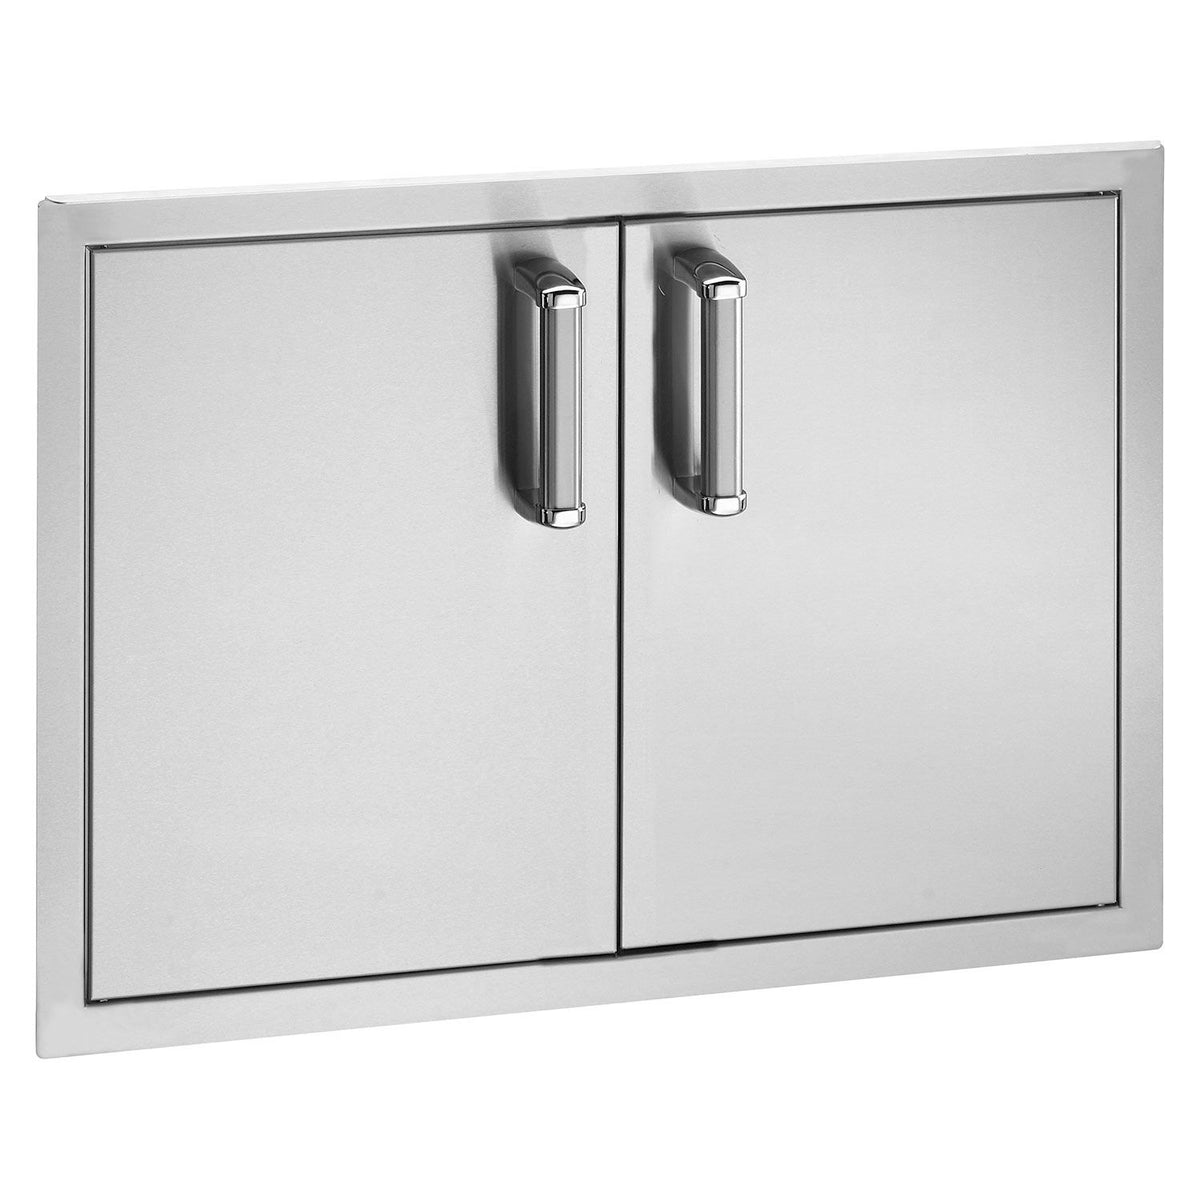 Fire Magic Premium Flush 30 Inch Double Access Door with Drawers